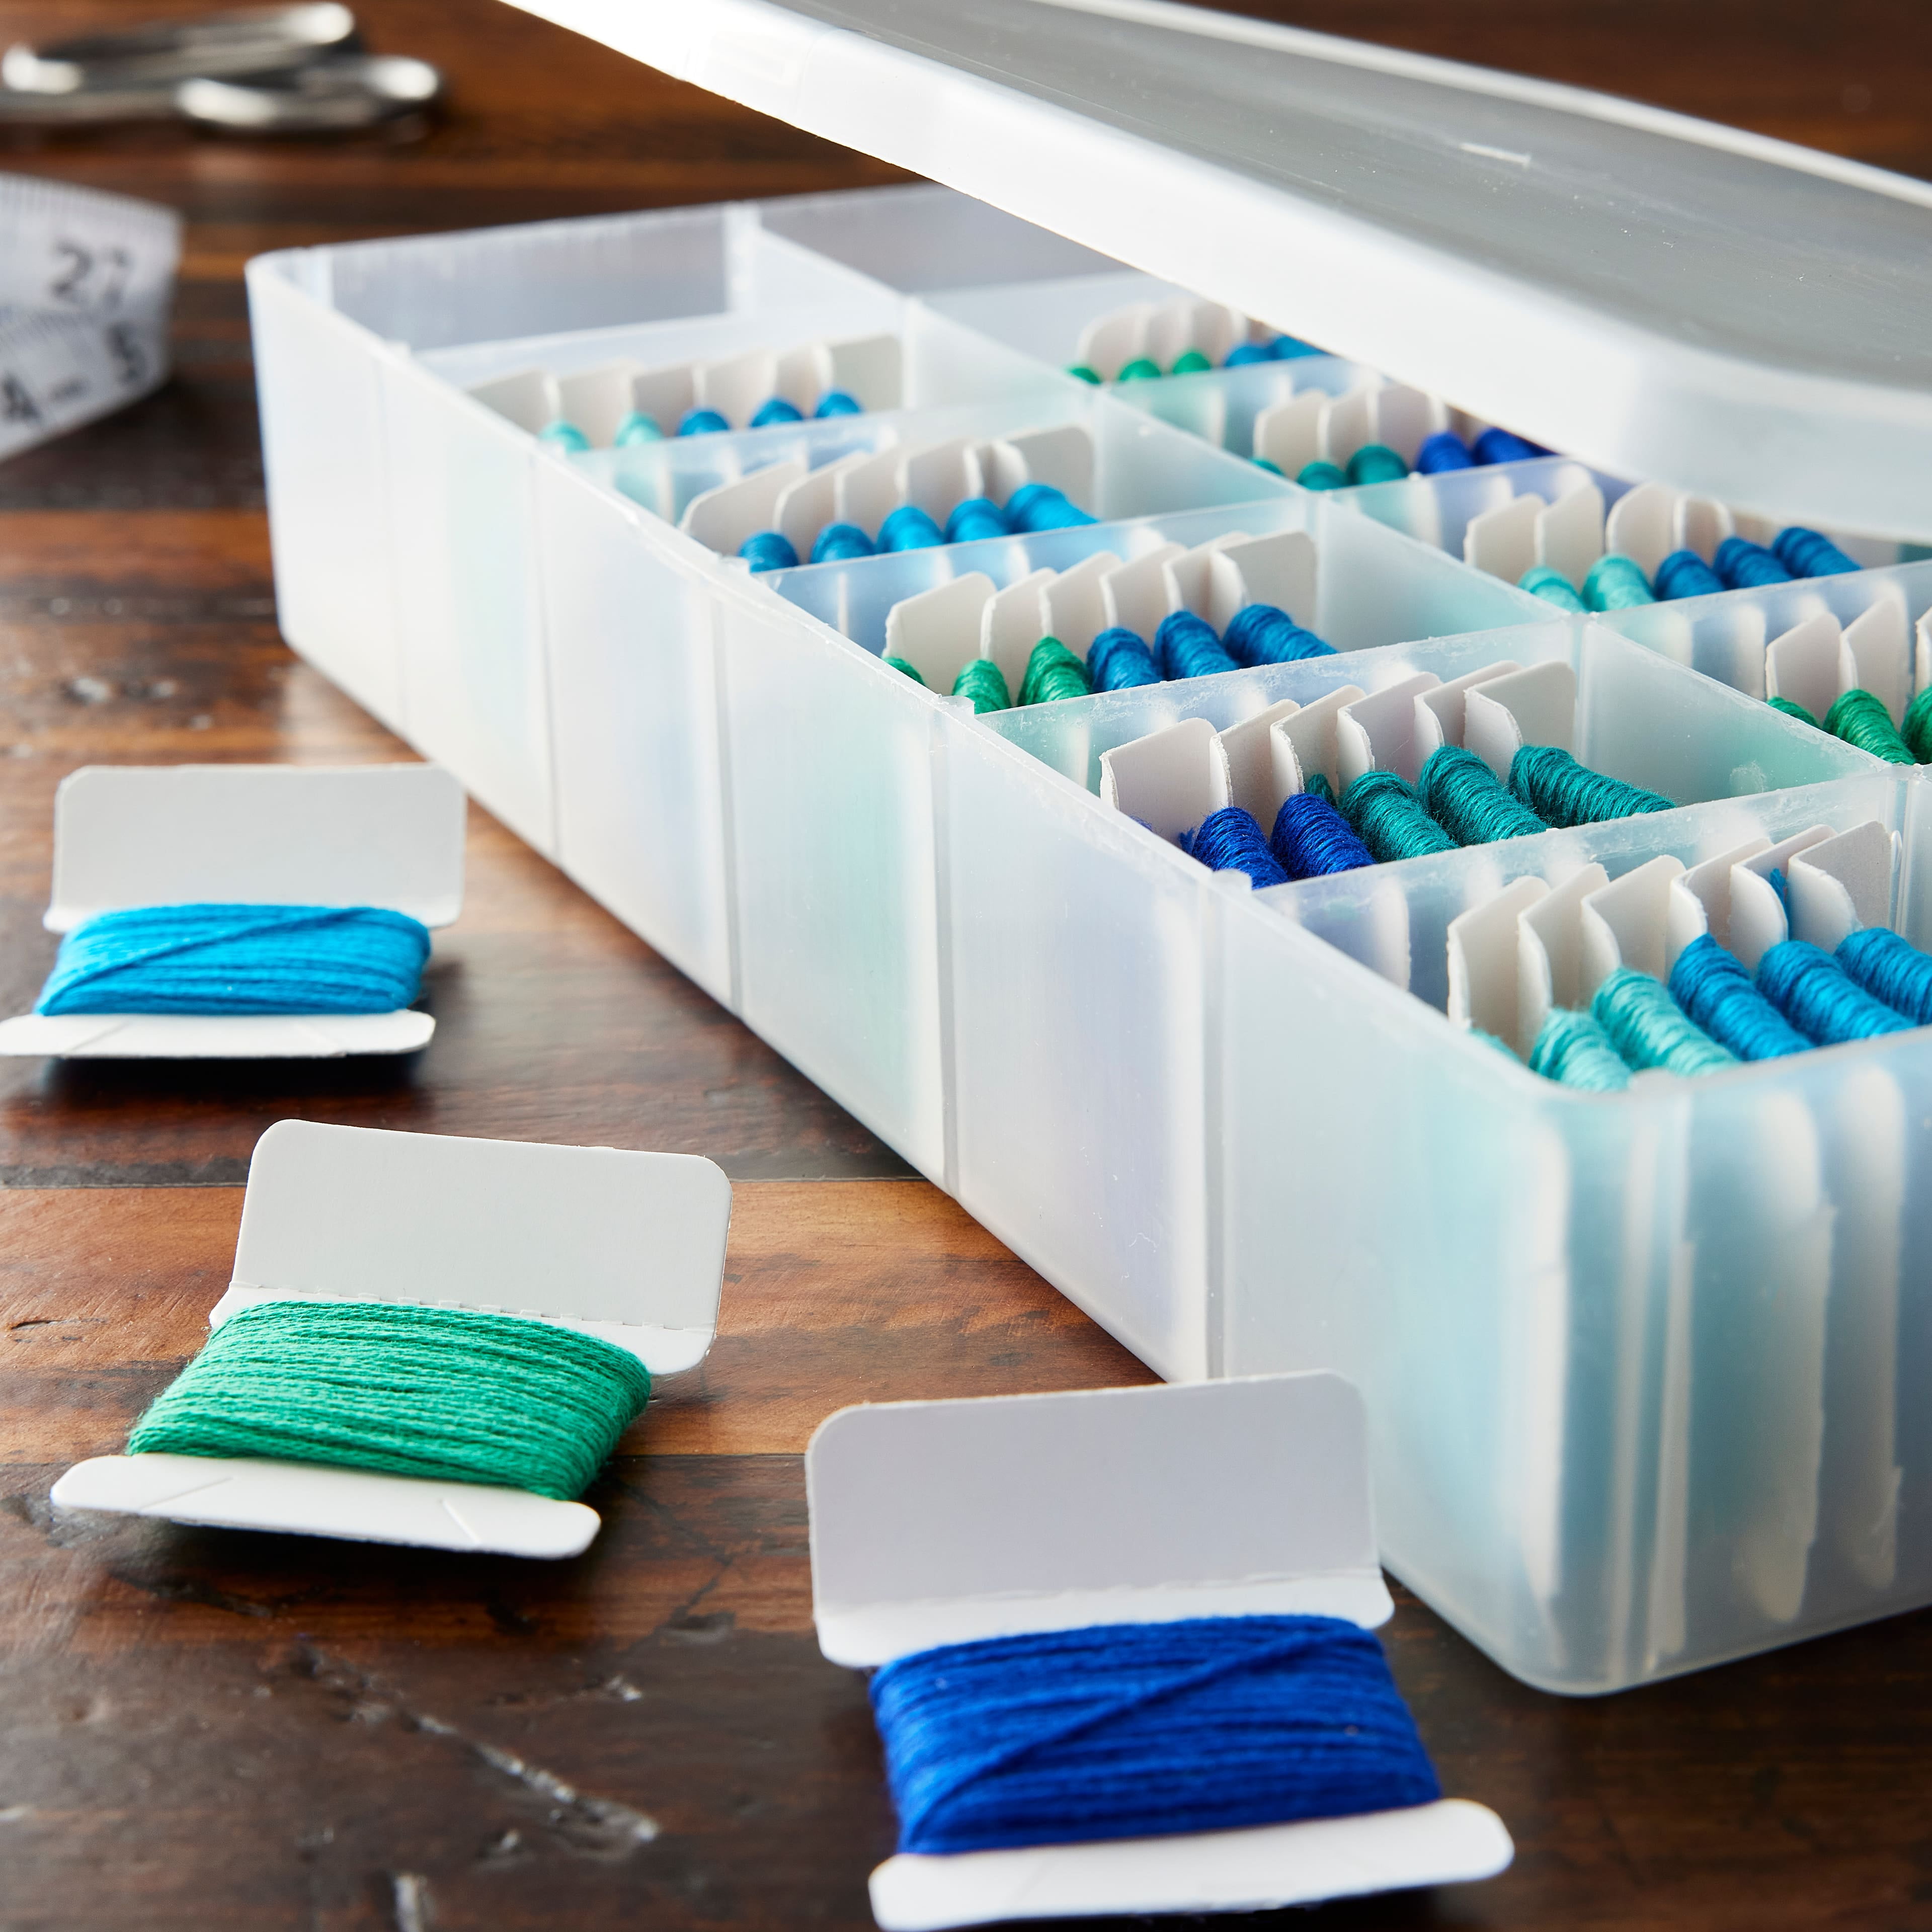 12 Pack: Embroidery Floss Organizer Kit by Loops & Threads, Size: 10.625 x 7.125 x 1.75